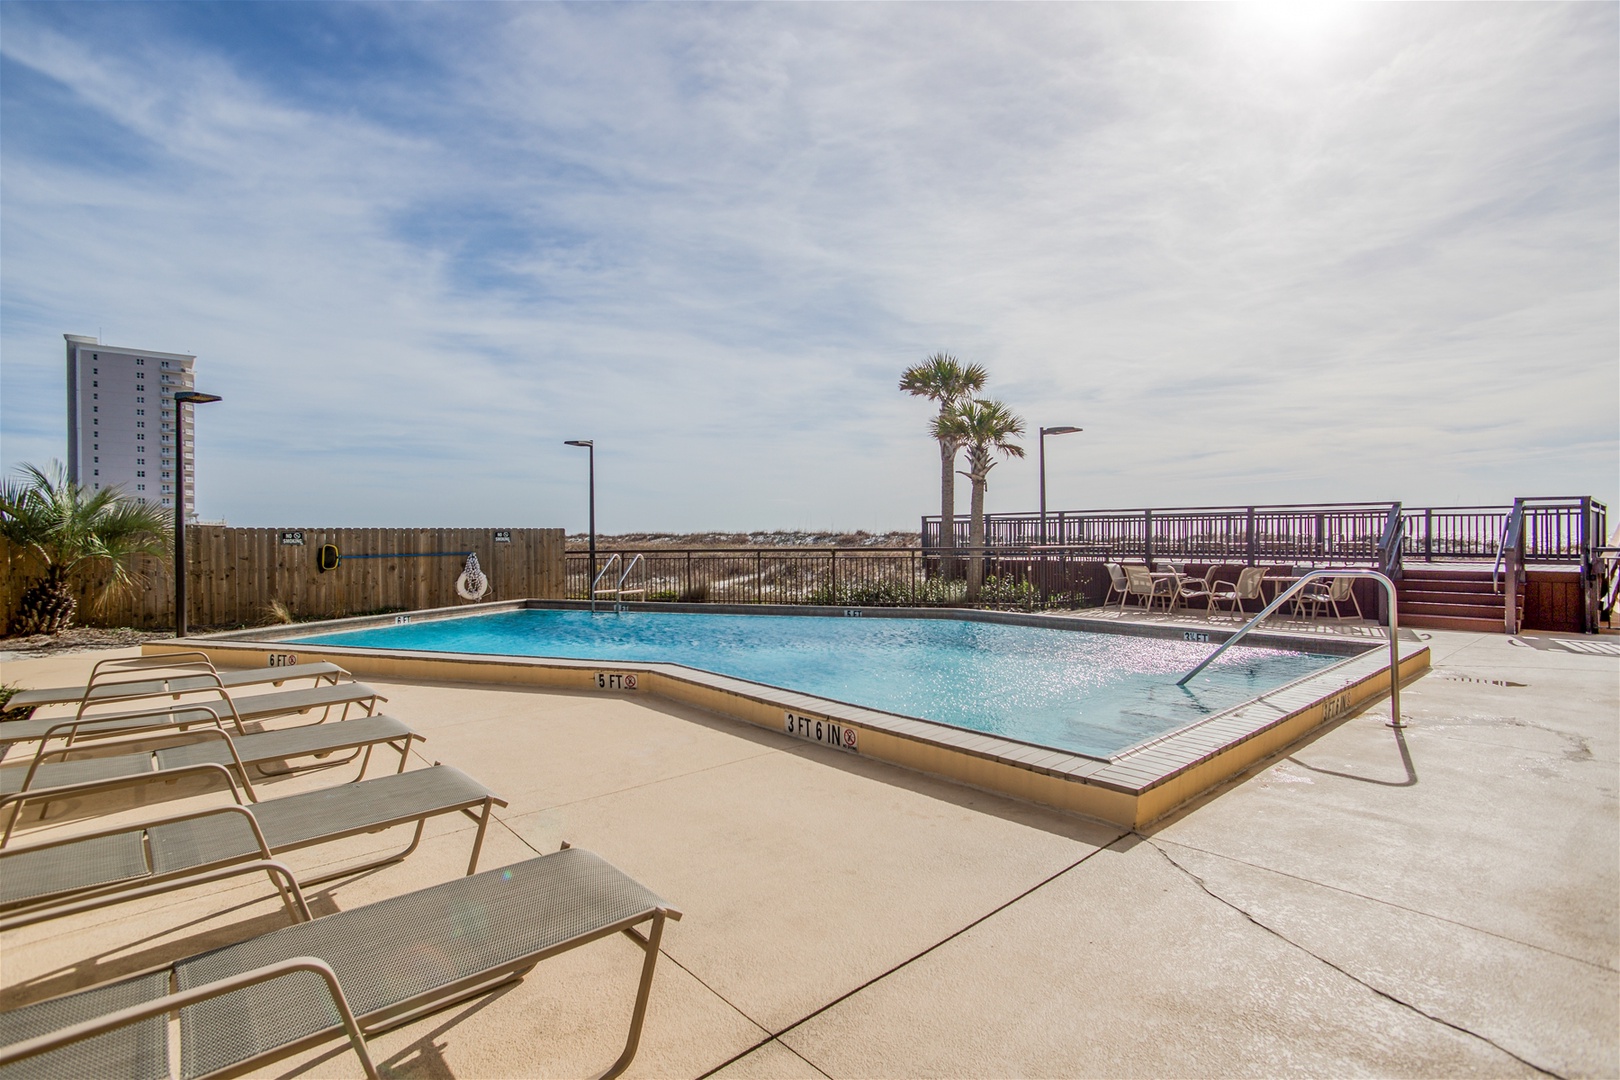 Perdido Key Ocean Breeze West Condos Pool And Chairs